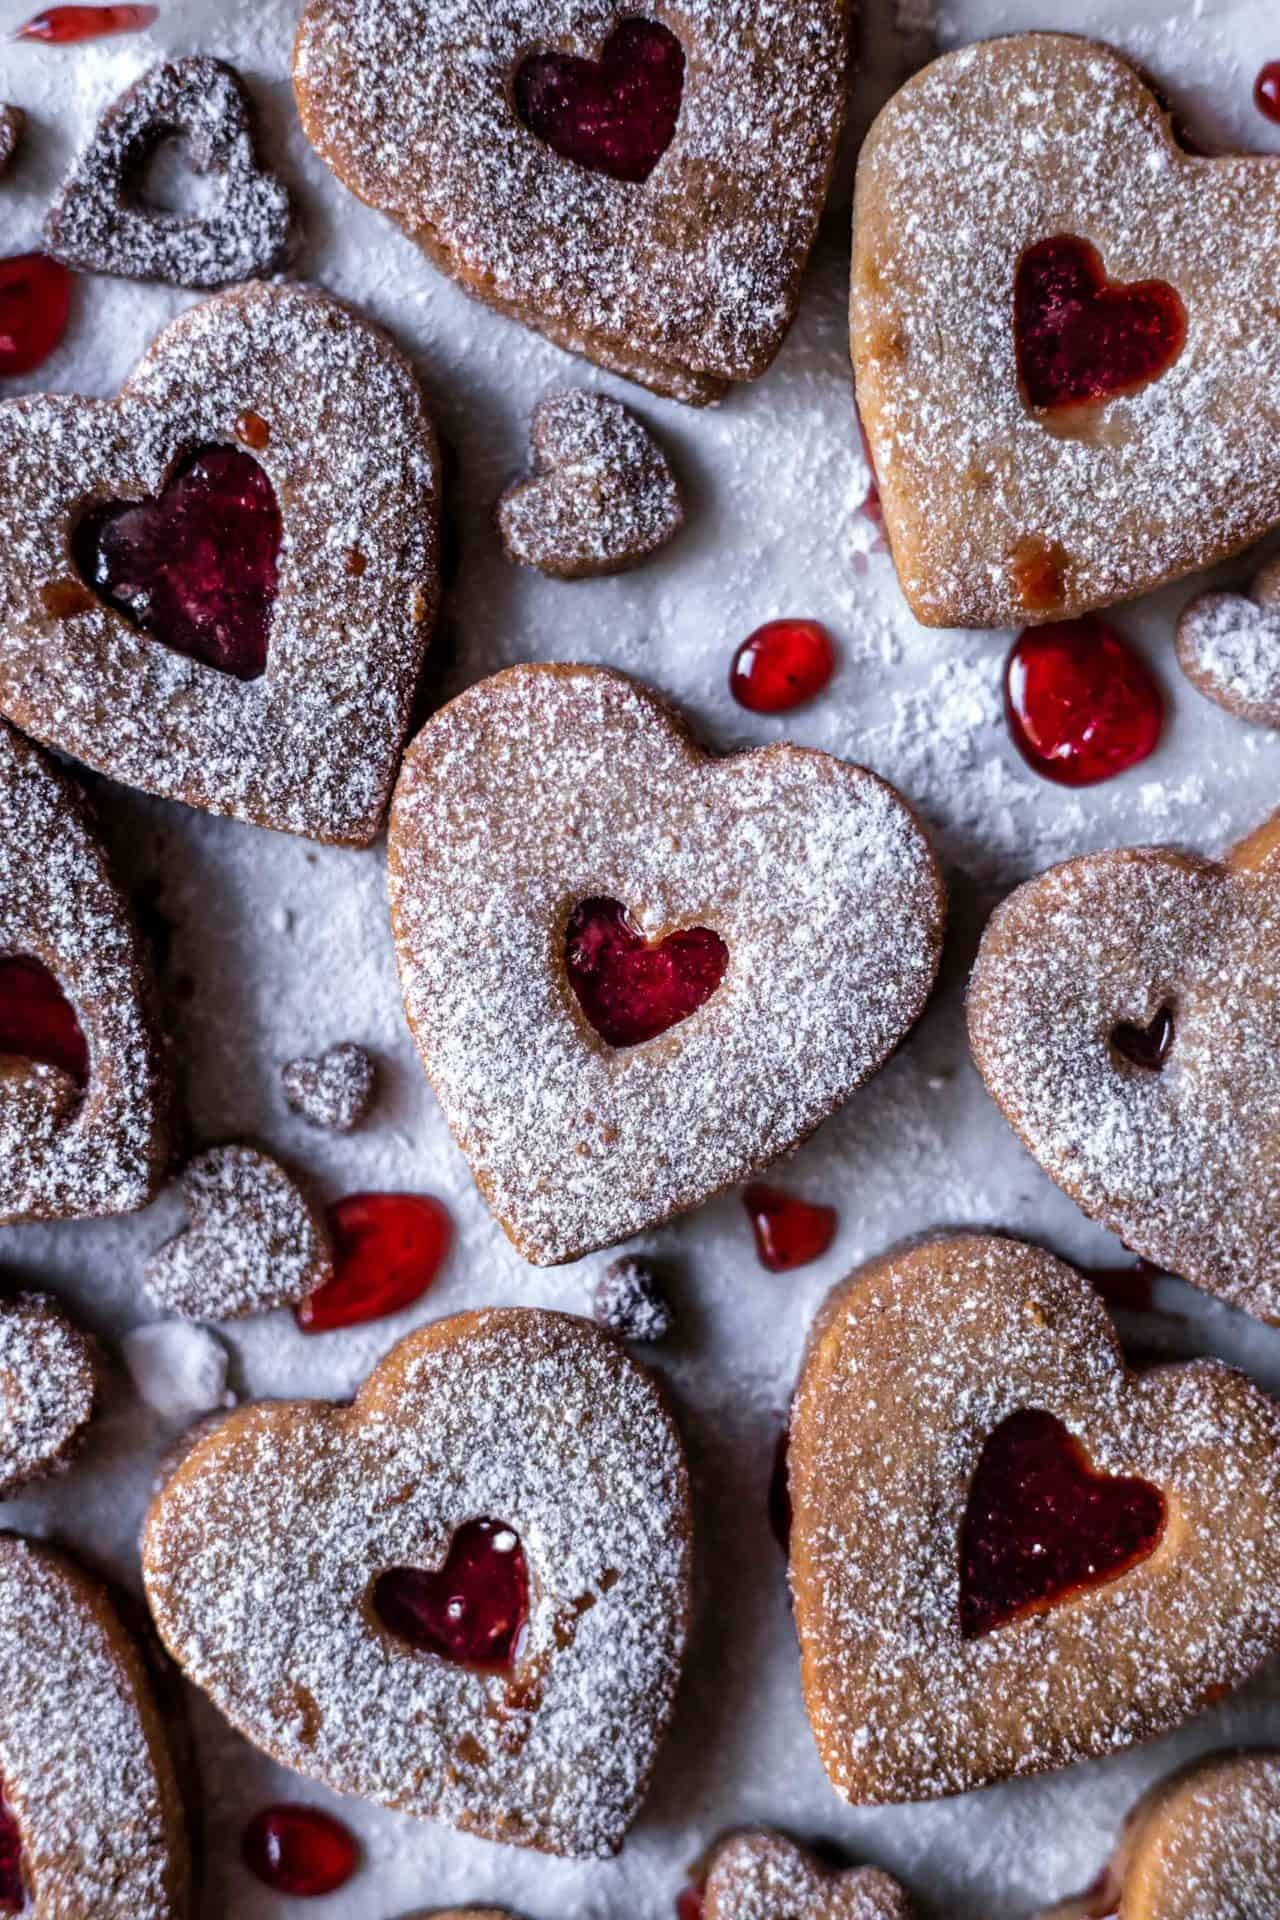 These Gluten-Free Linzer Cookies are perfectly tender, not too sweet, jam infused and the best part super simple to make.
